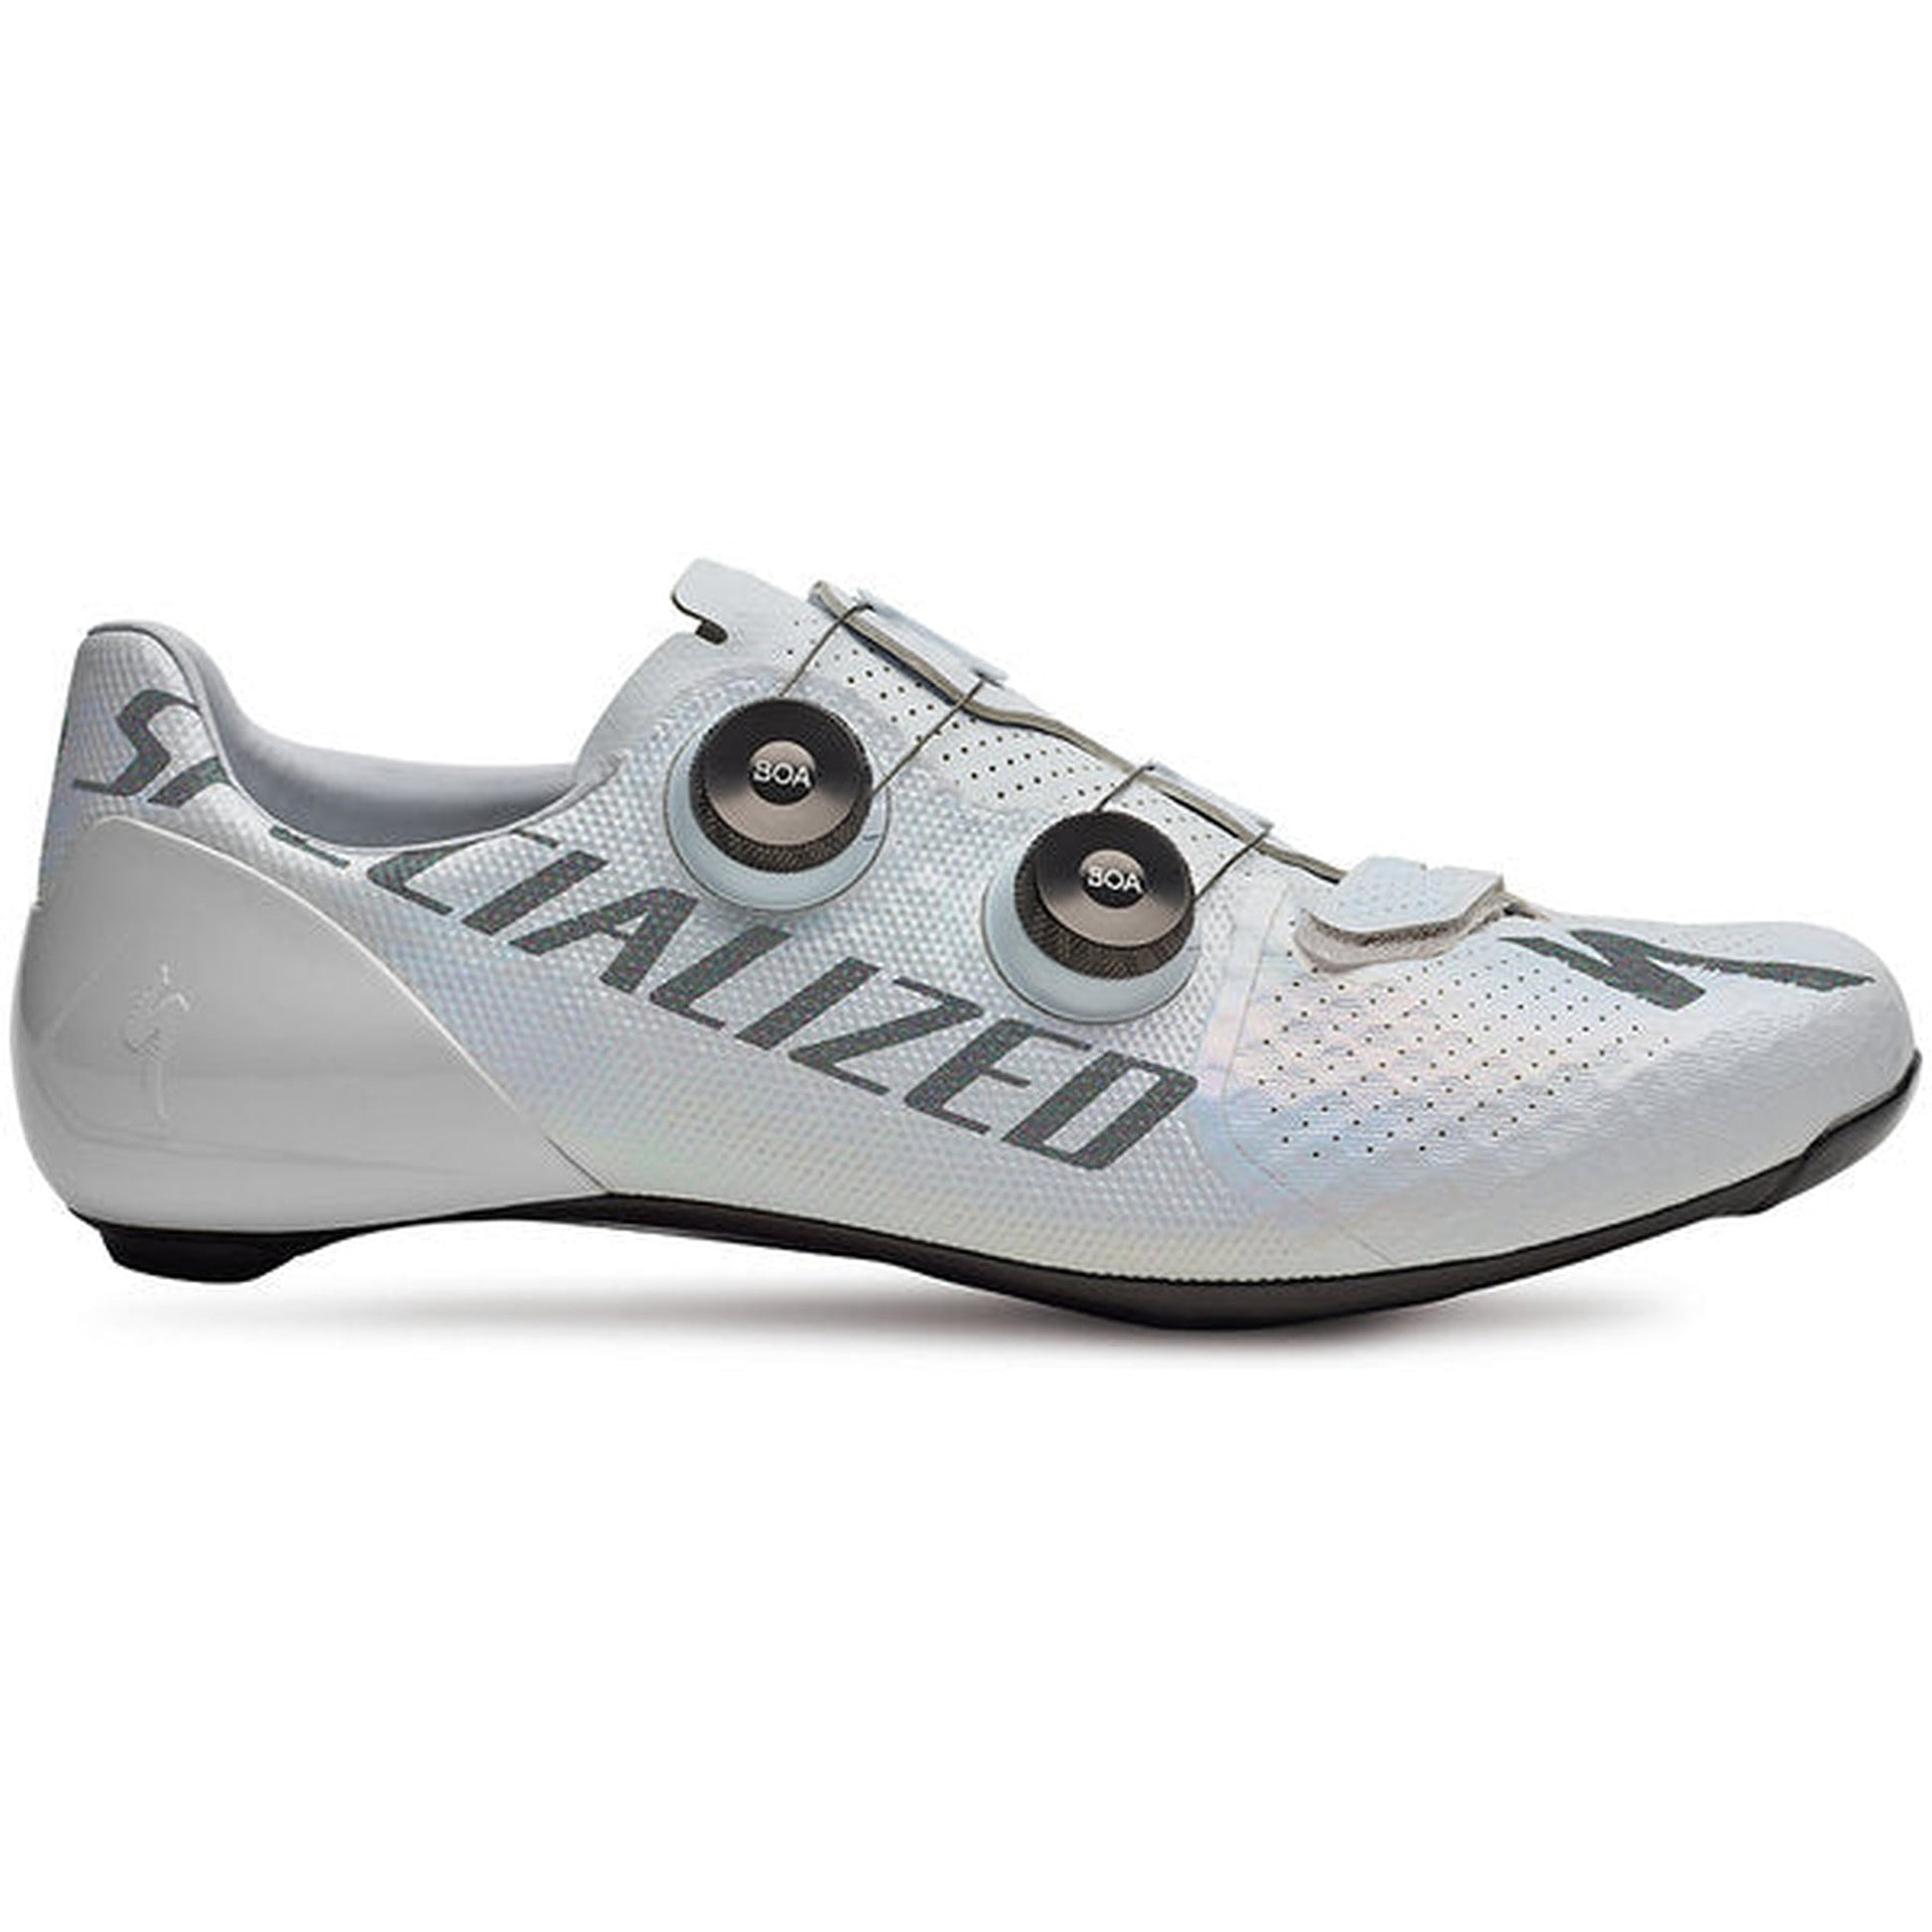 S-Works 7 Road Shoes-Bells-Cycling-Specialized